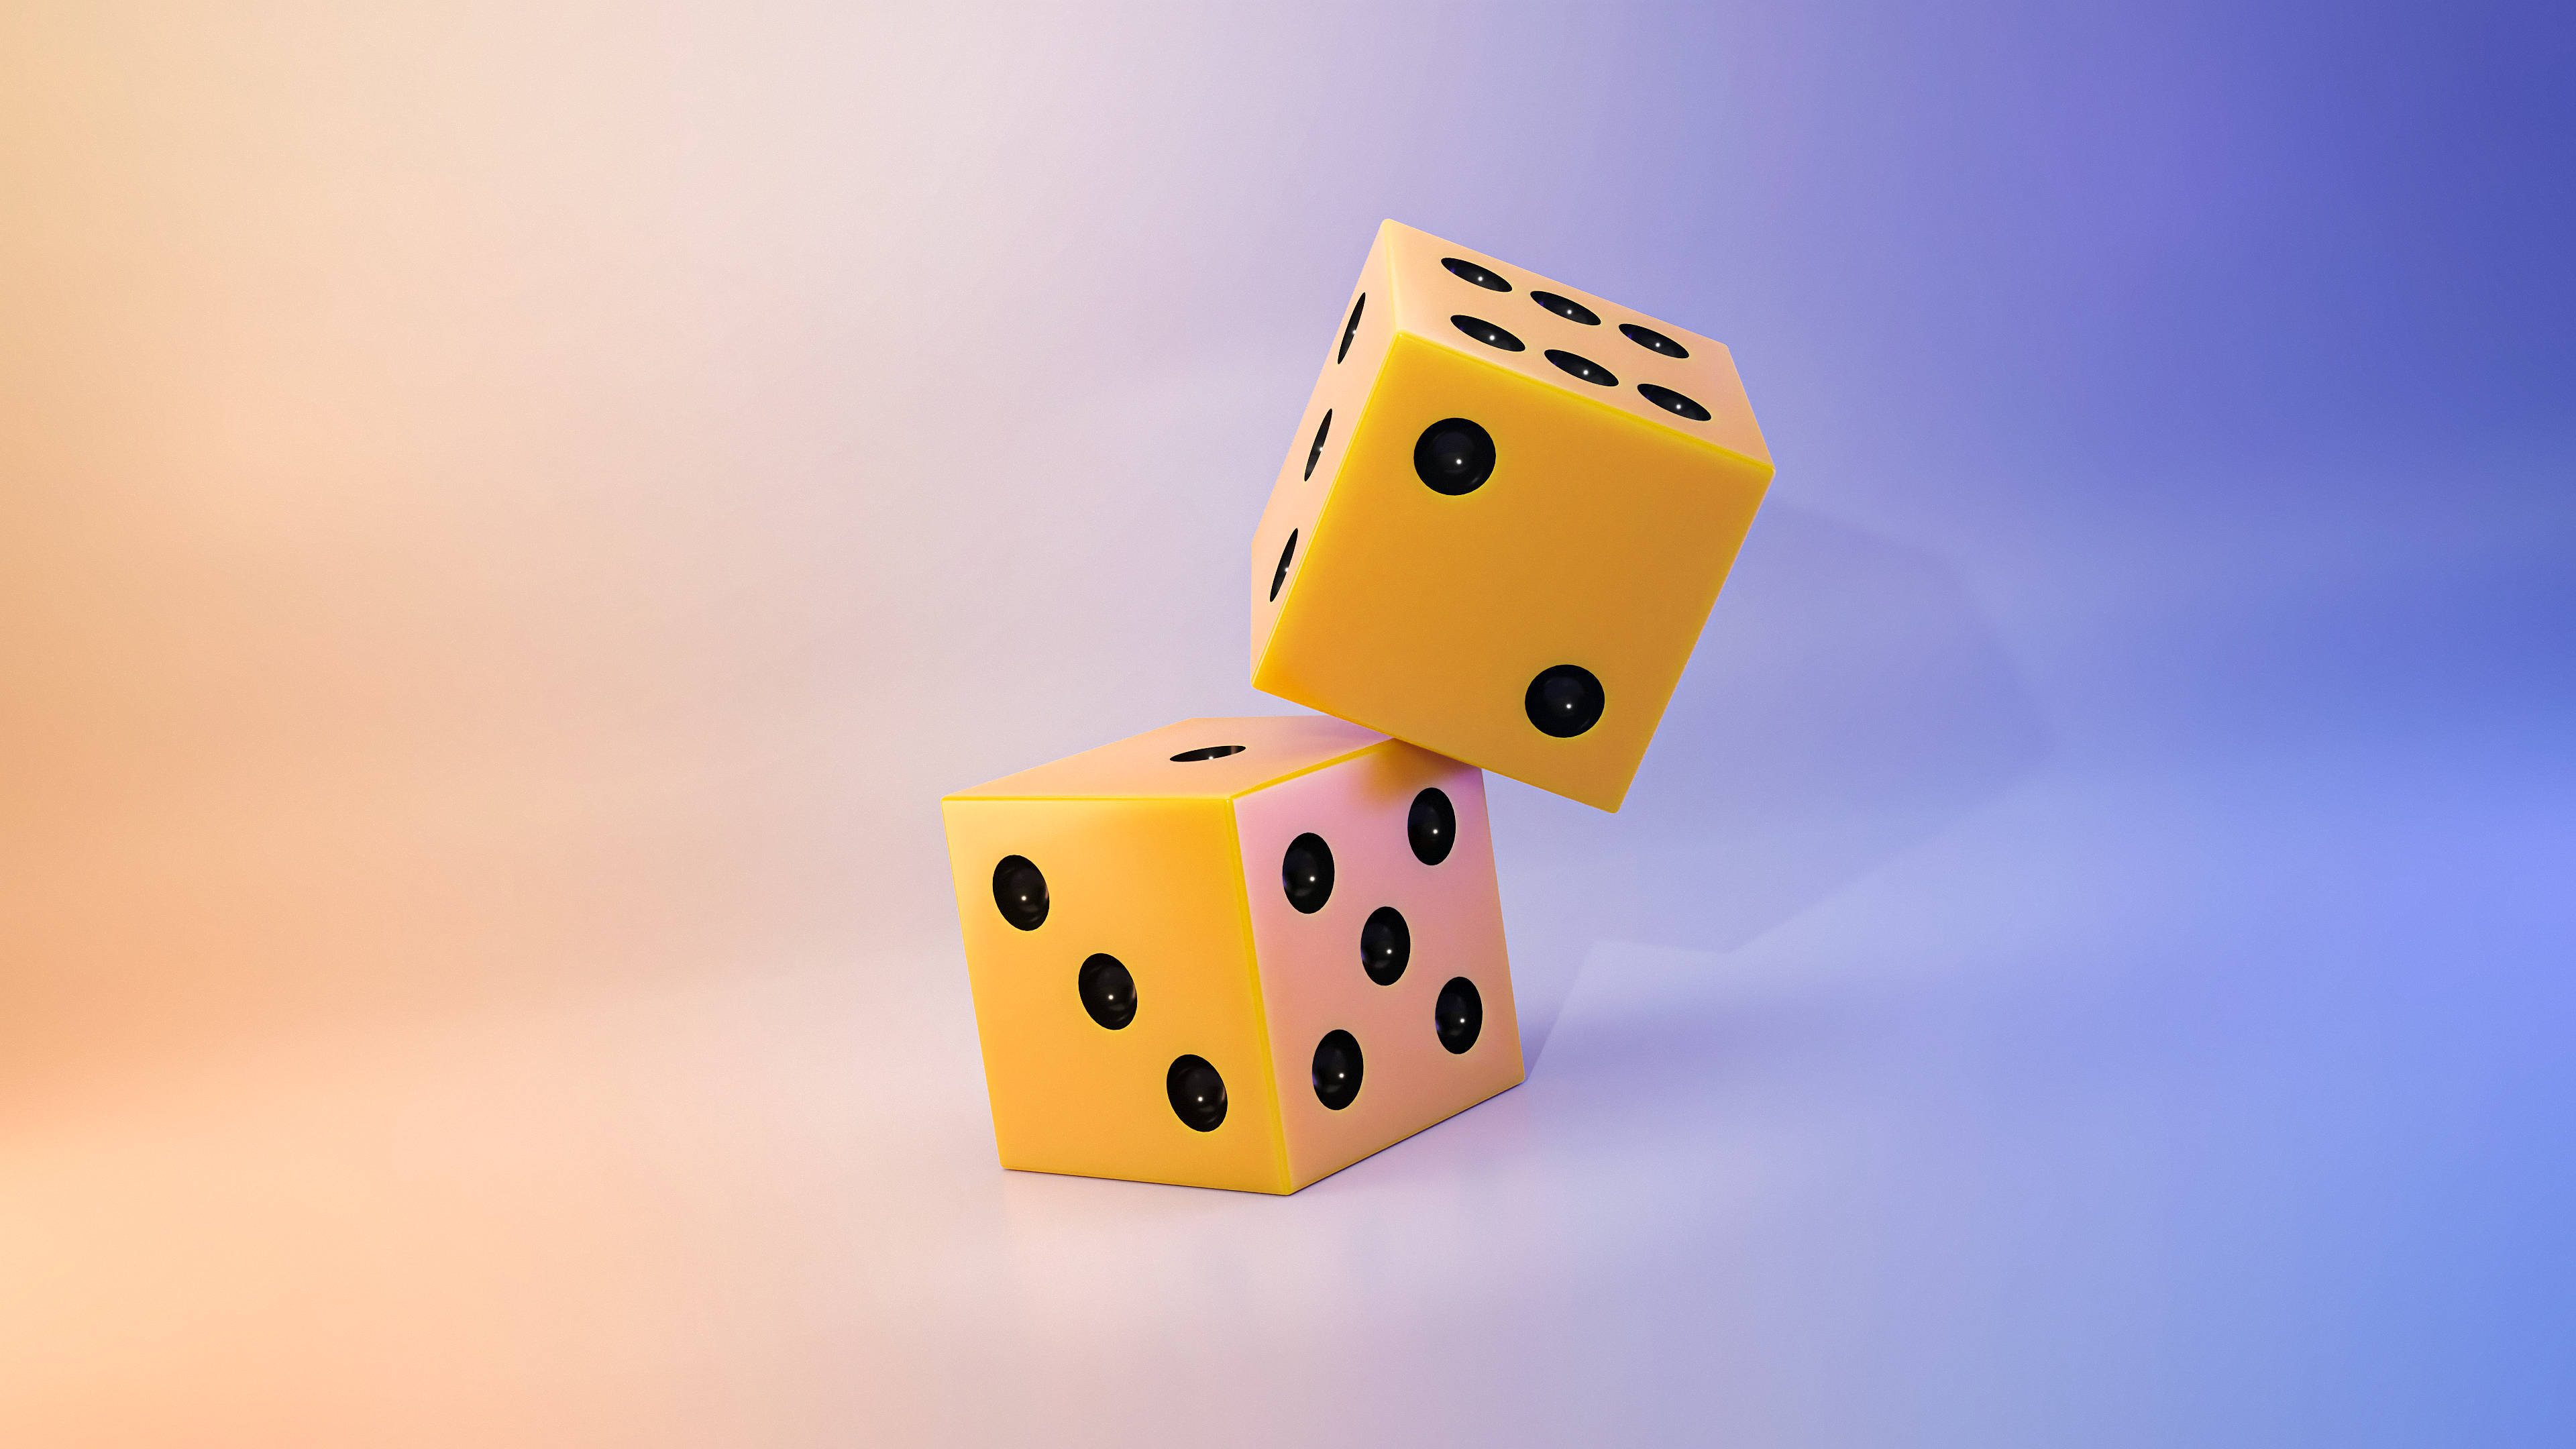 Two Dices 3d Android Phone Wallpaper